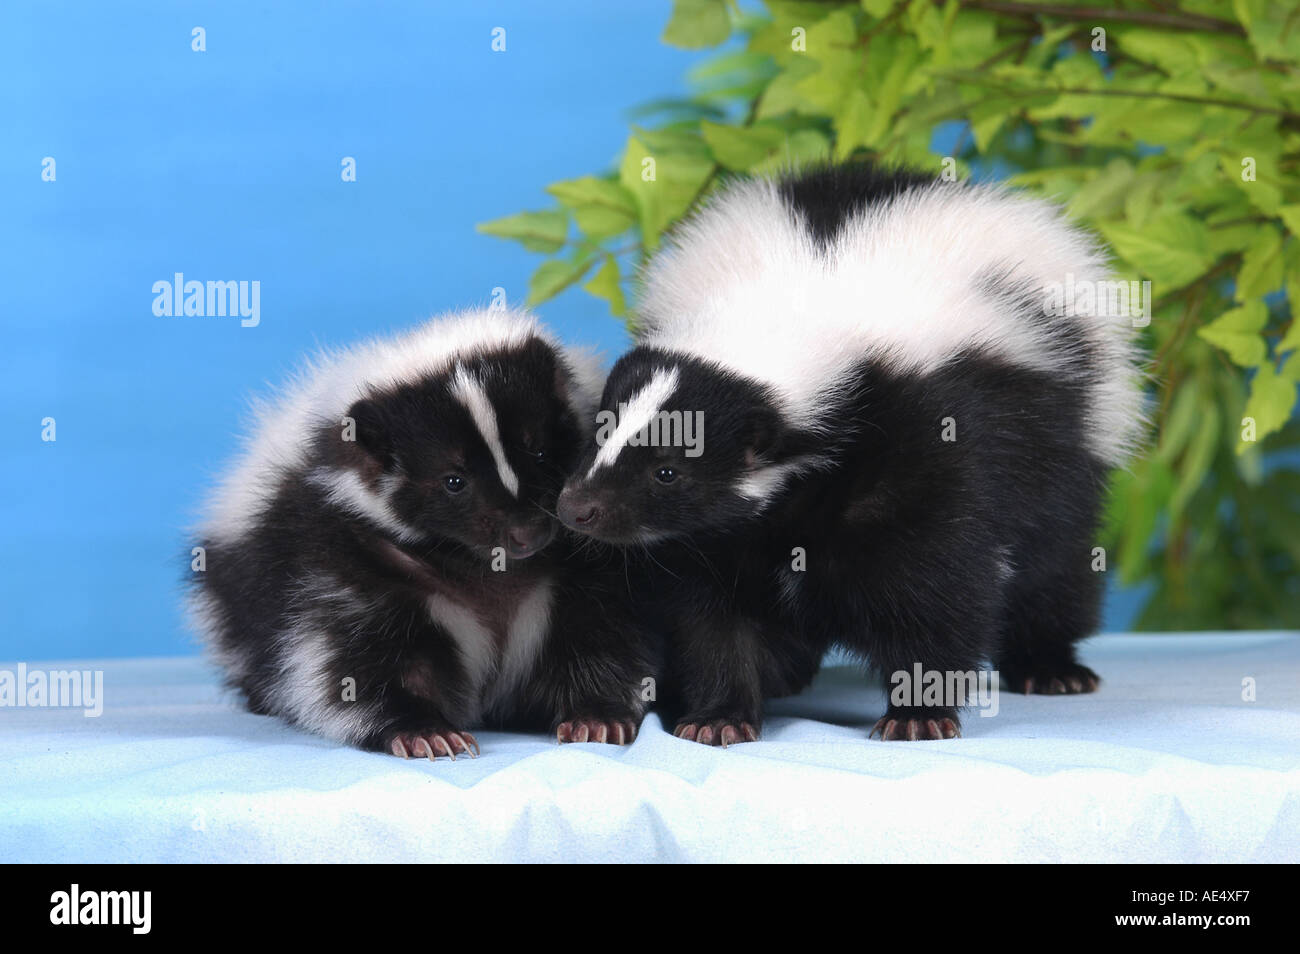 two young striped skunks / Mephitis mephitis Stock Photo